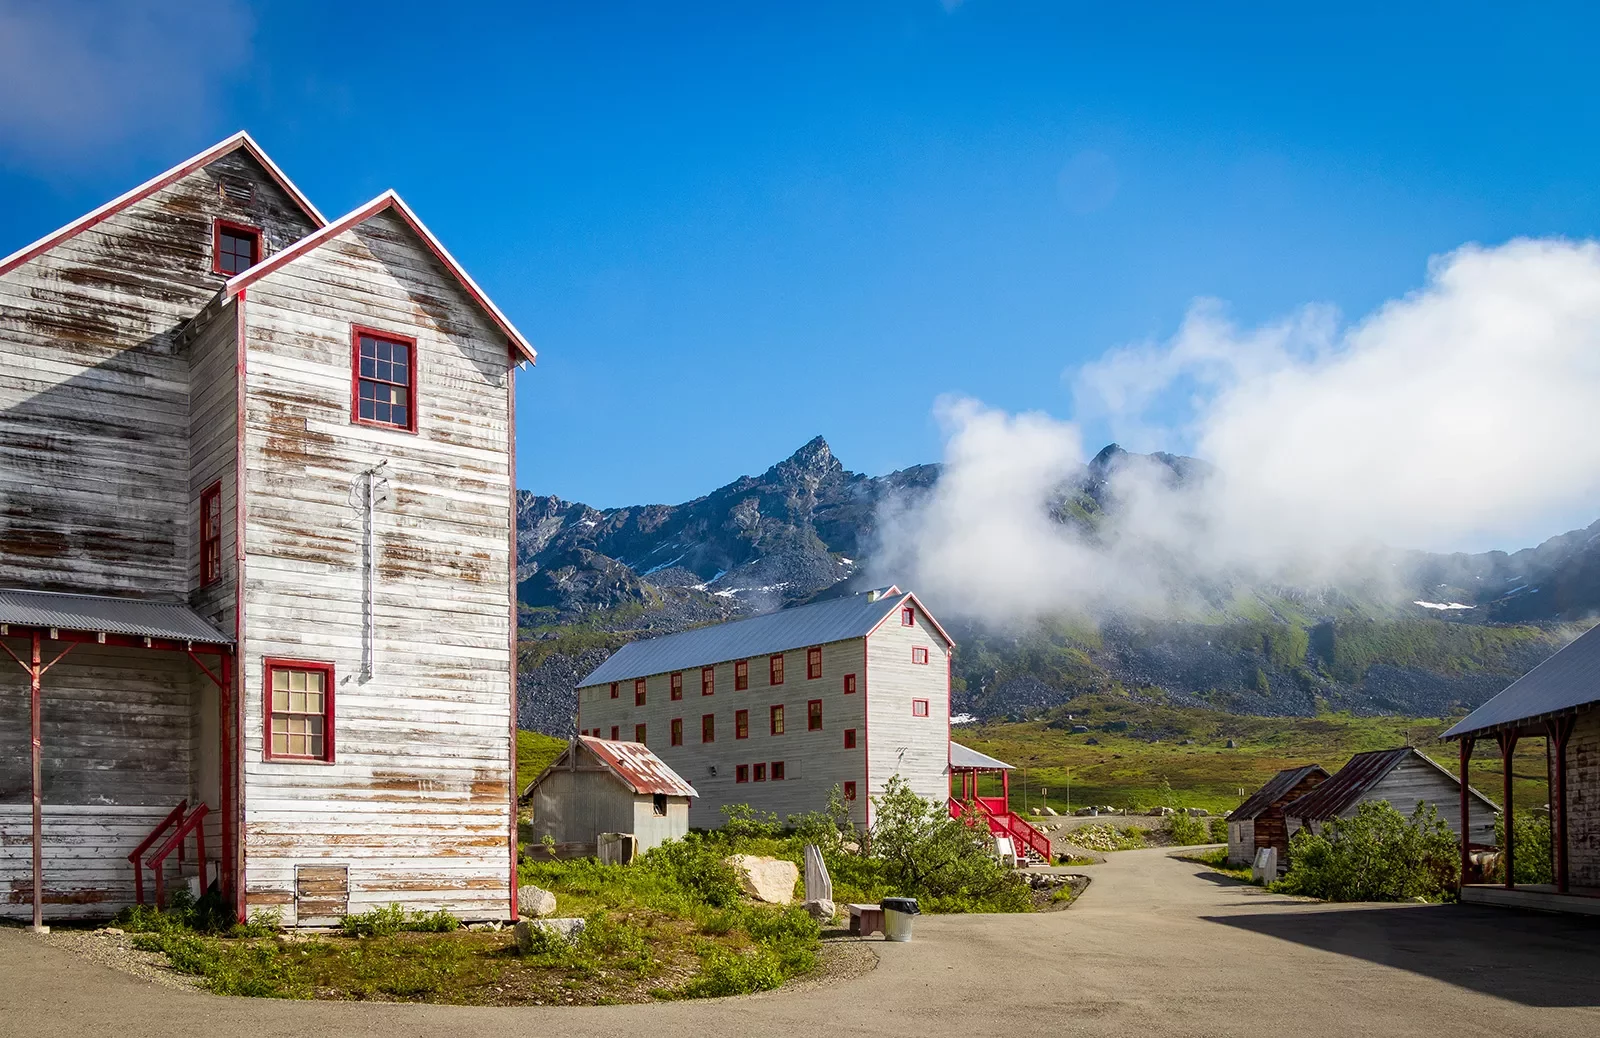 Wood sided buildings next to a mountain in Alaska